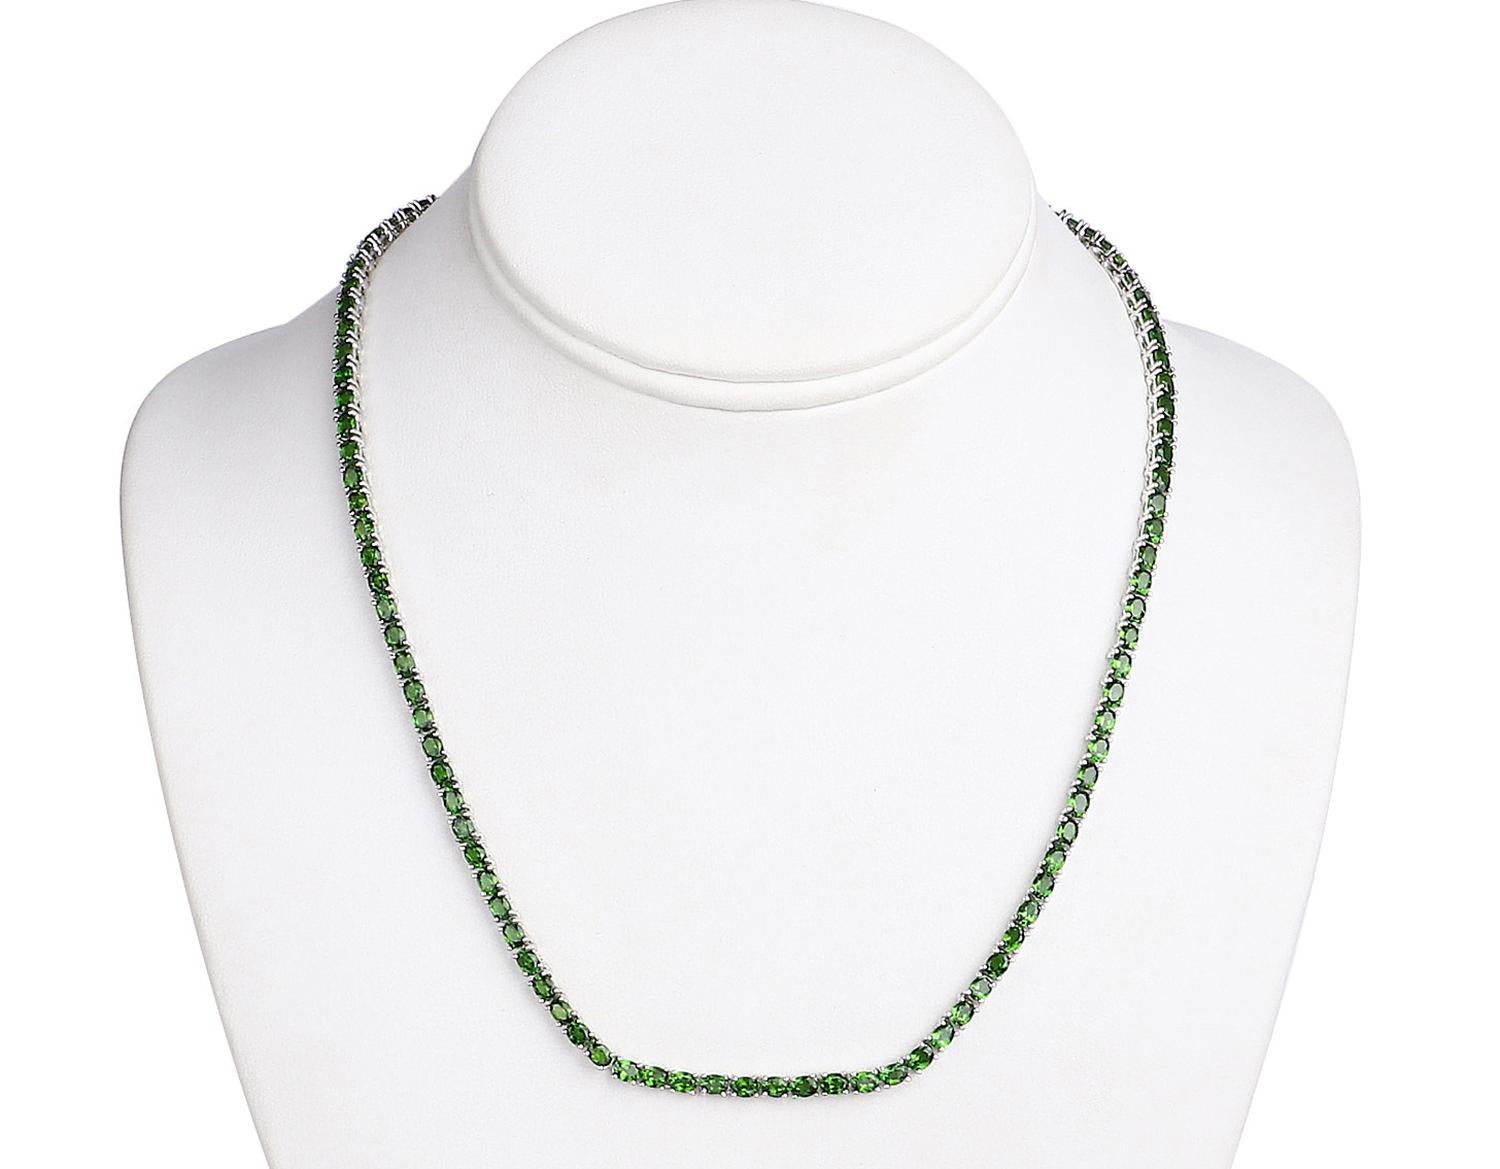 It comes with the appraisal by GIA GG/AJP
Chrome Diopside = 19 Carats ( 5 x 3 mm )
Cut: Oval
Total Quantity of Chrome Diopside: 86
Primary Stone Color: Green
Metal: Sterling Silver
Length: 18 Inches